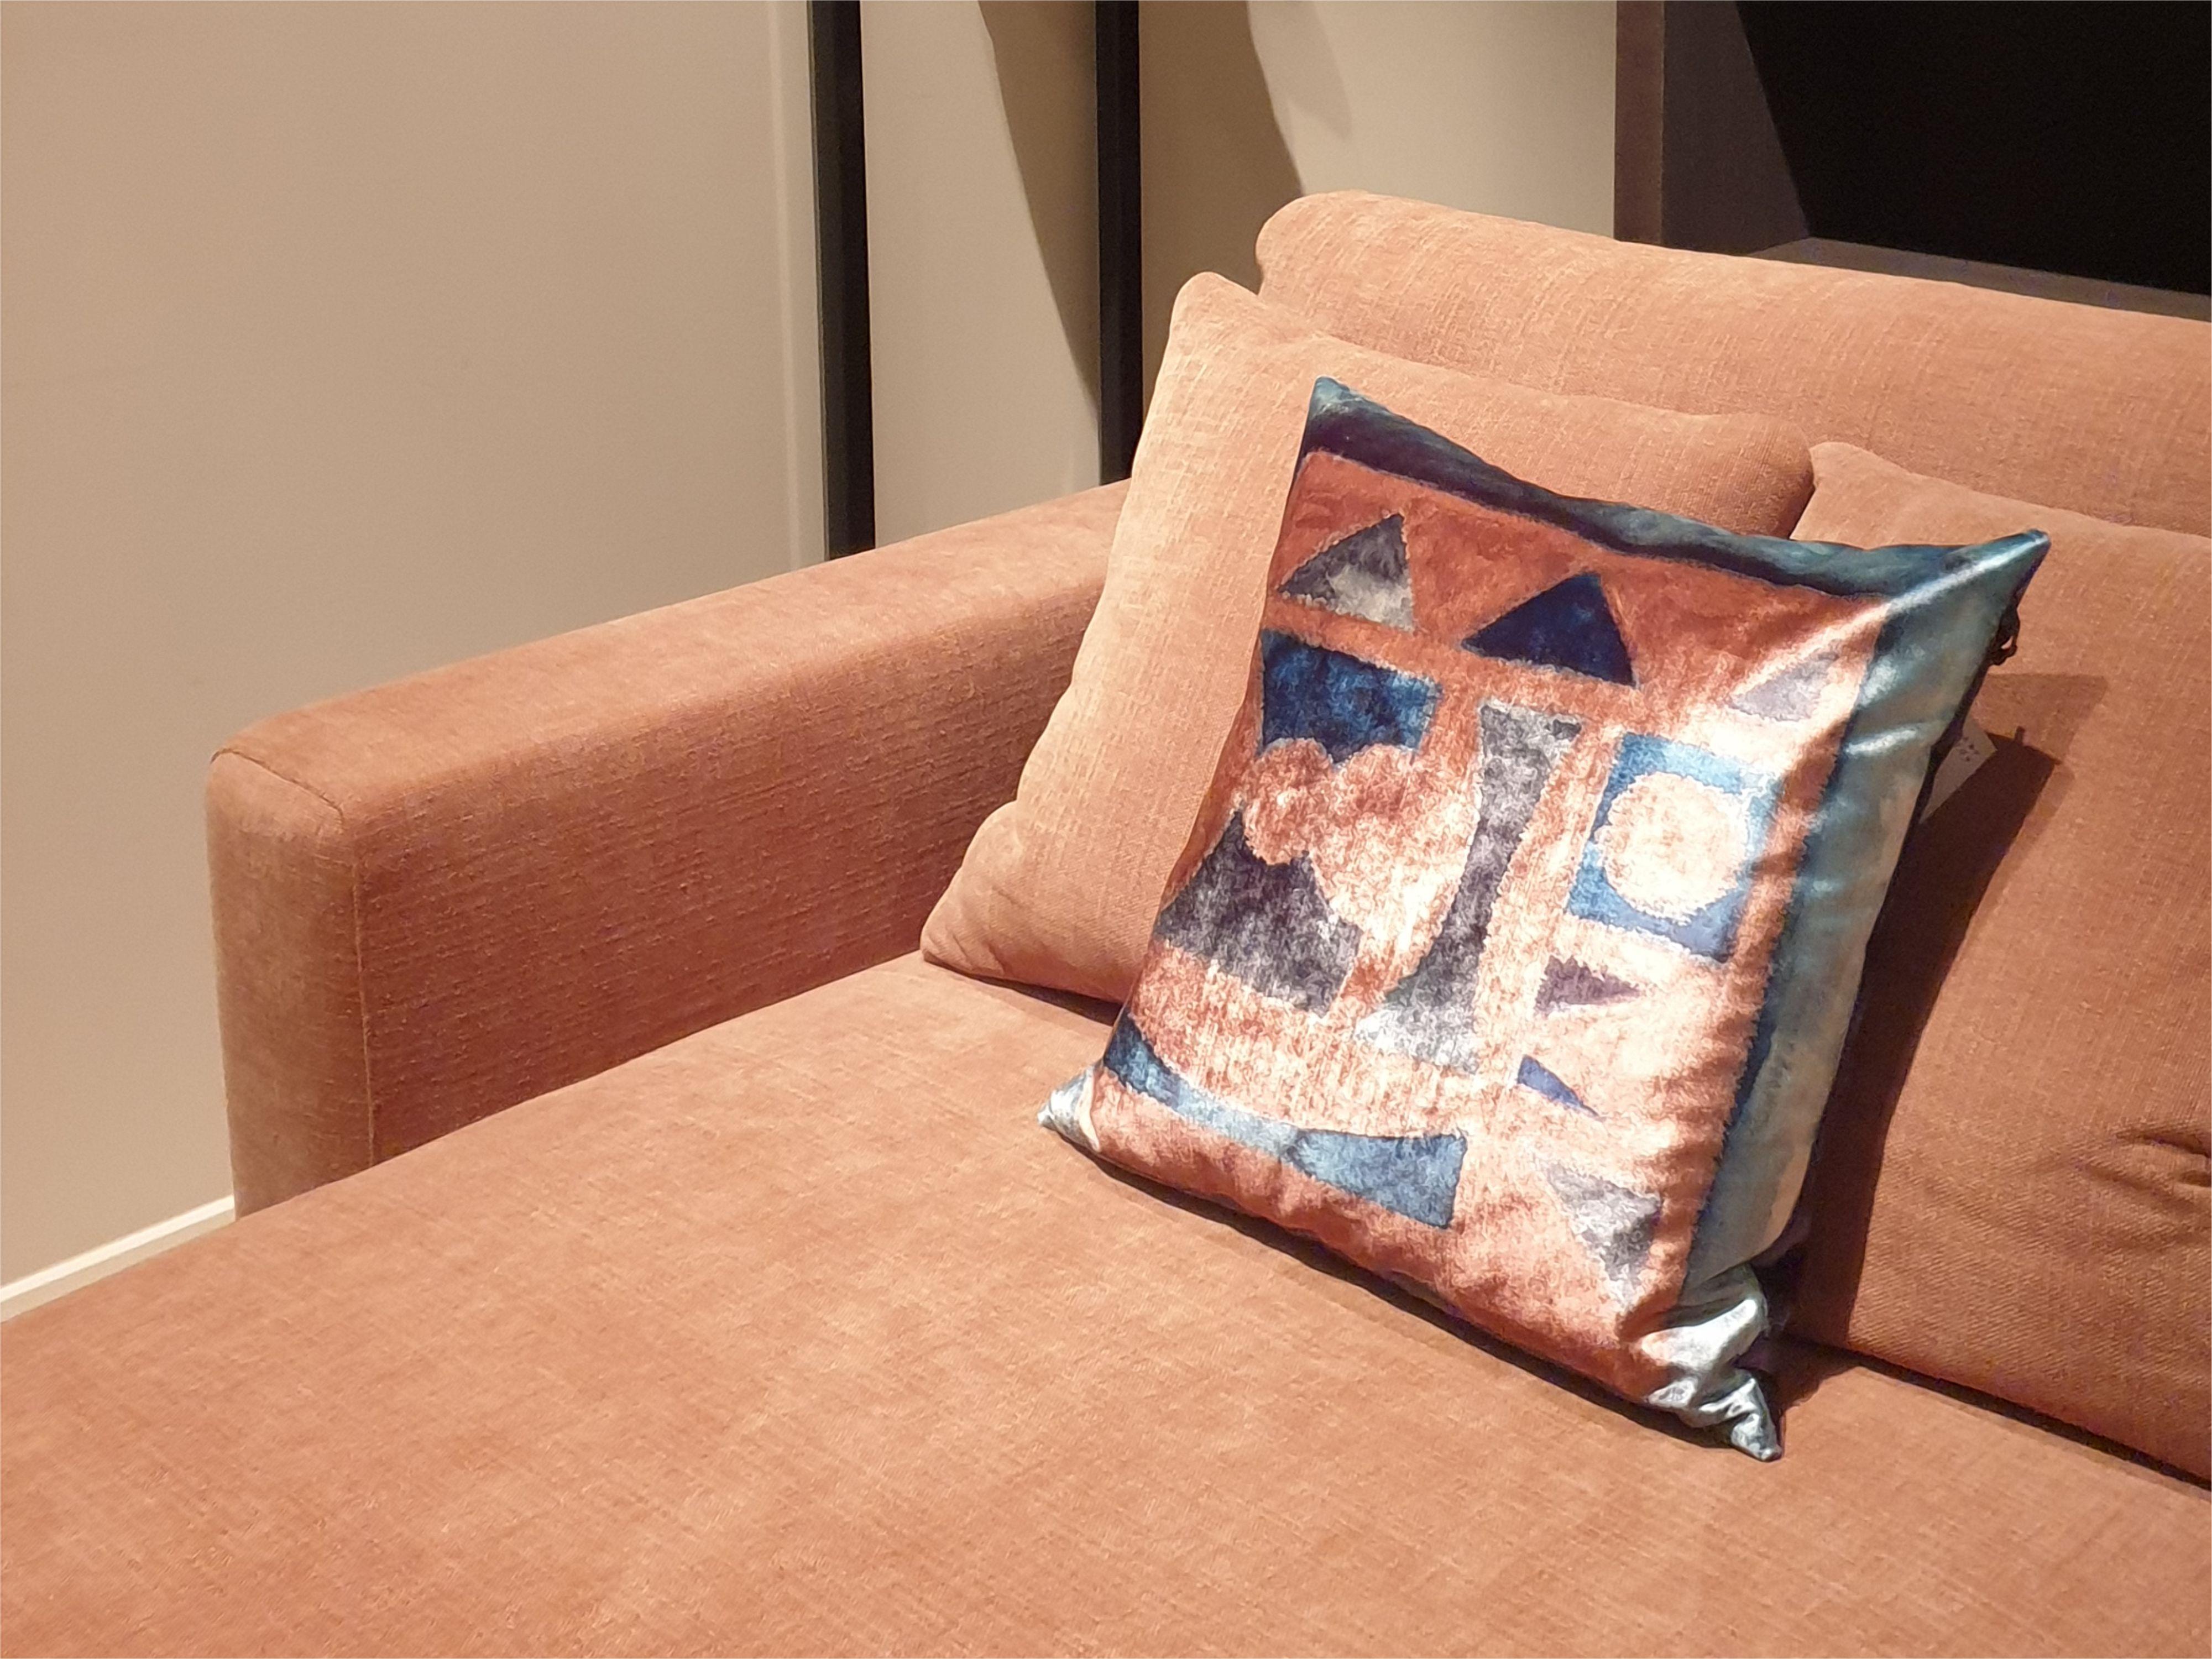 Chantal Keizer painted a number of works and transferred them to fabric in a limited Art collection. Of each work a maximum of 50 cushions 
are available worldwide. The ART collection contains 9 different pieces. The pillow has a luxurious look and